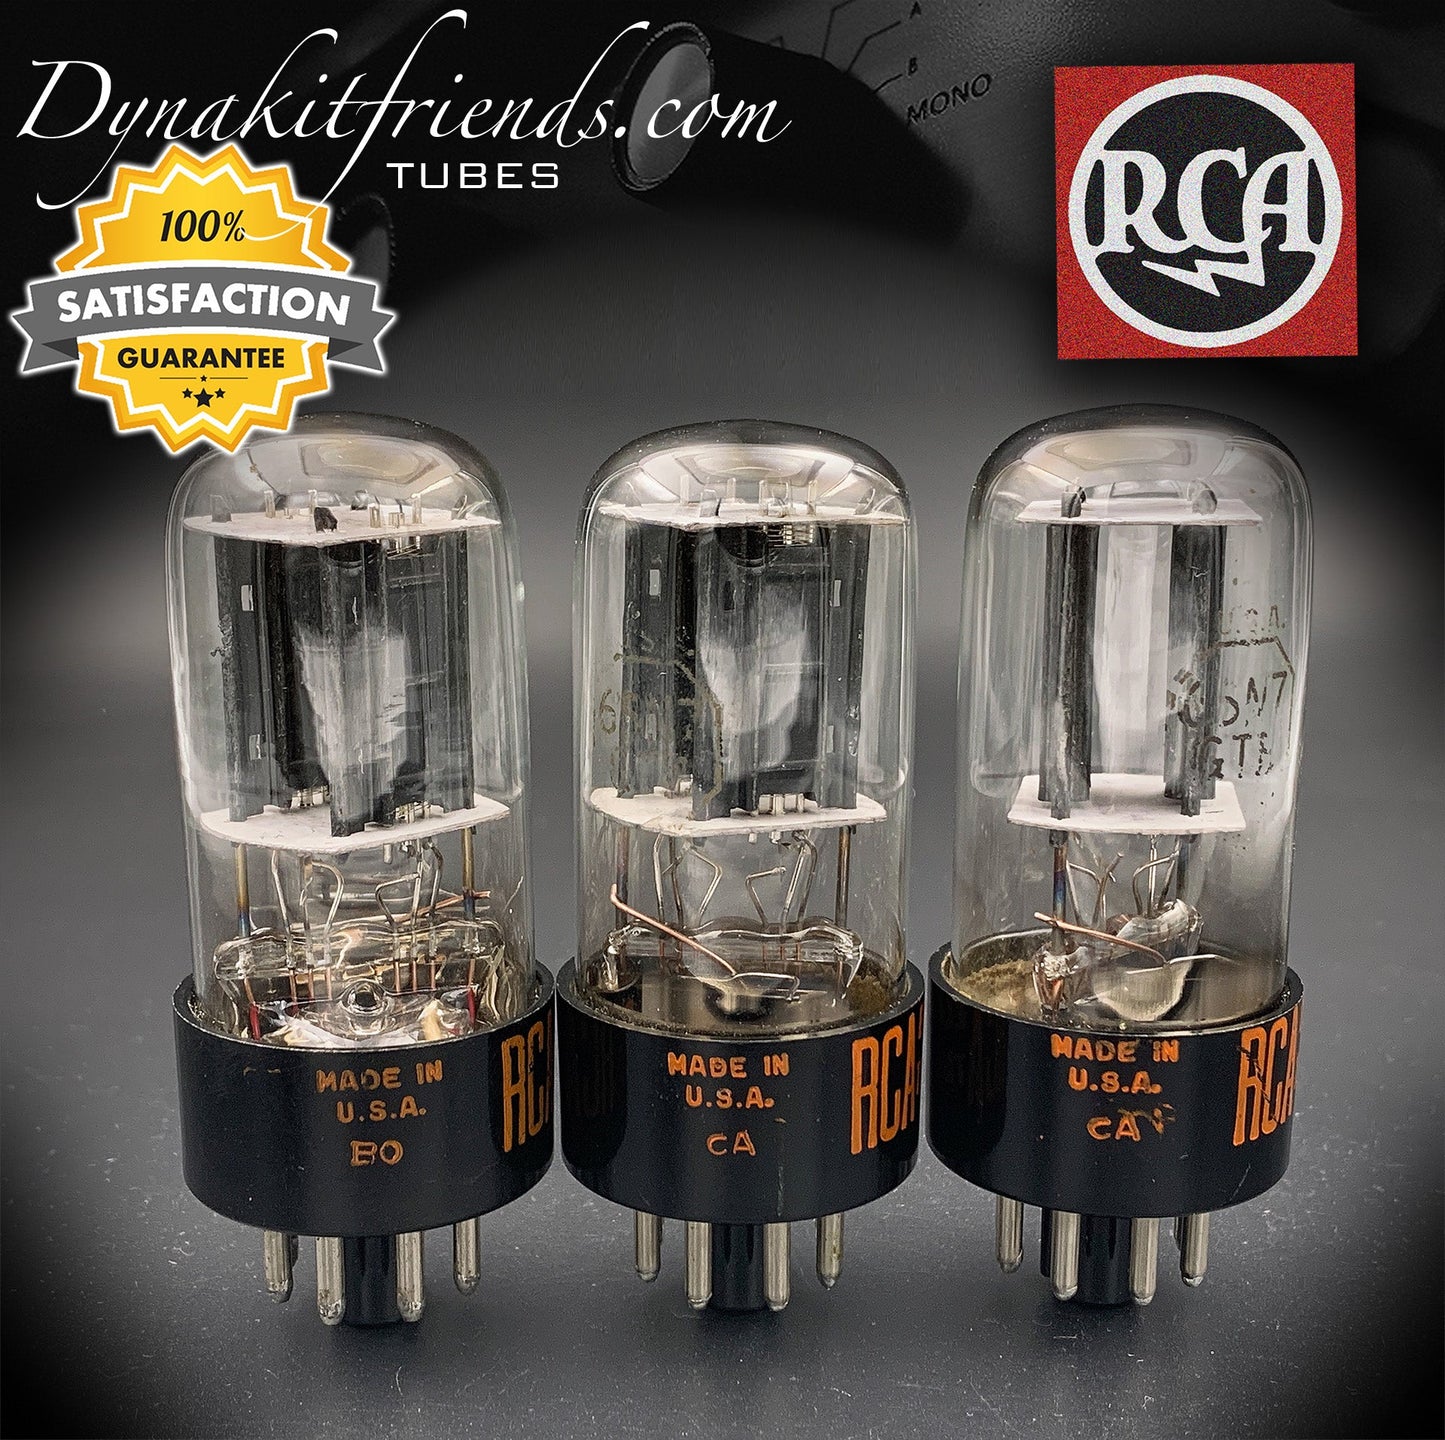 6SN7GTB RCA Black Plates Bottom D/[] Getter Matched Tubes Made in USA 60's - Vacuum Tubes Treasures